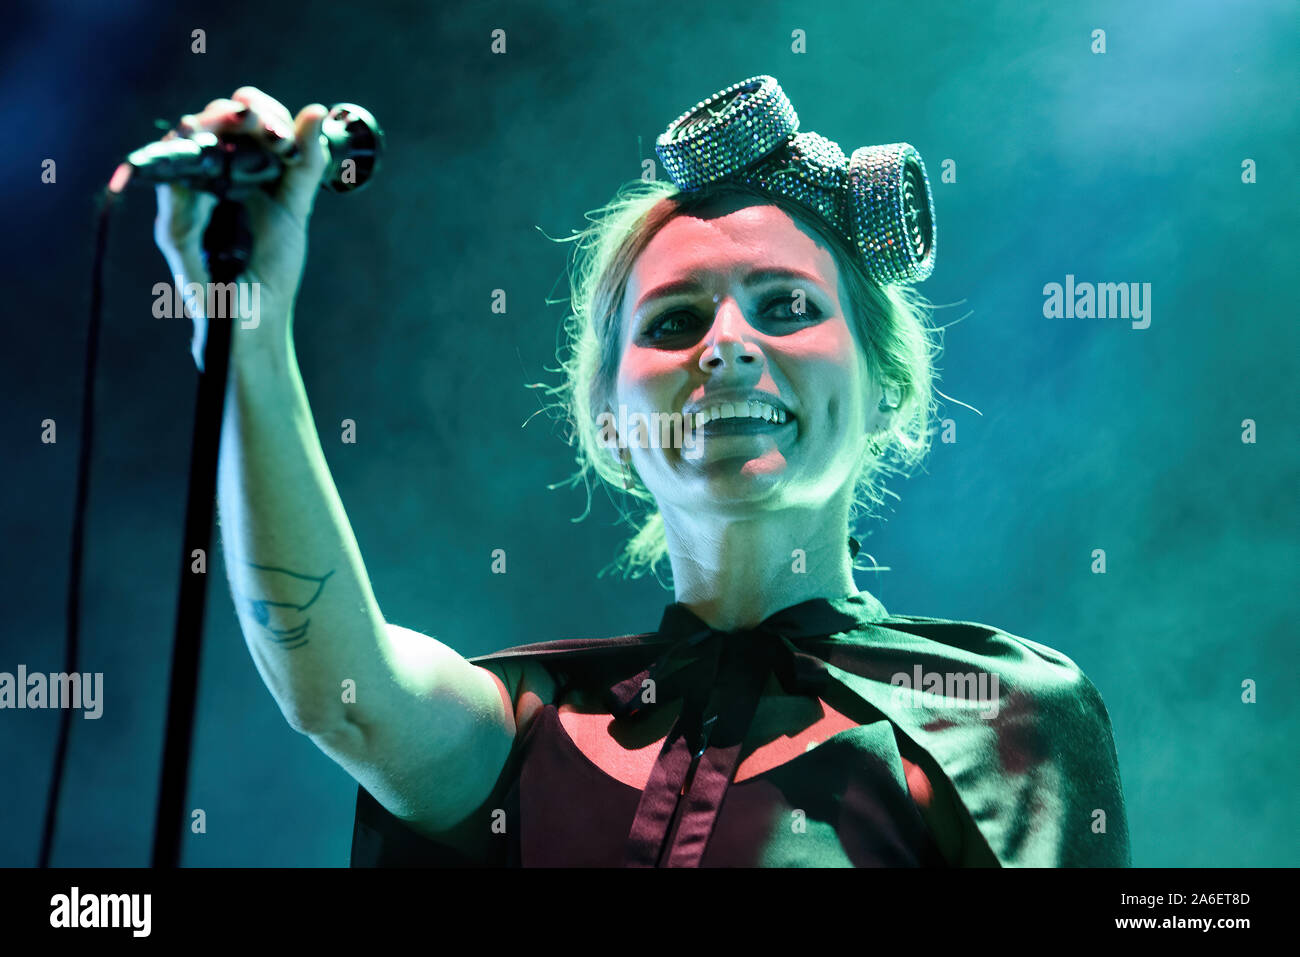 MADRID - SEP 7: The Cardigans (band) perform in concert at Dcode Music Festival on September 7, 2019 in Madrid, Spain. Stock Photo